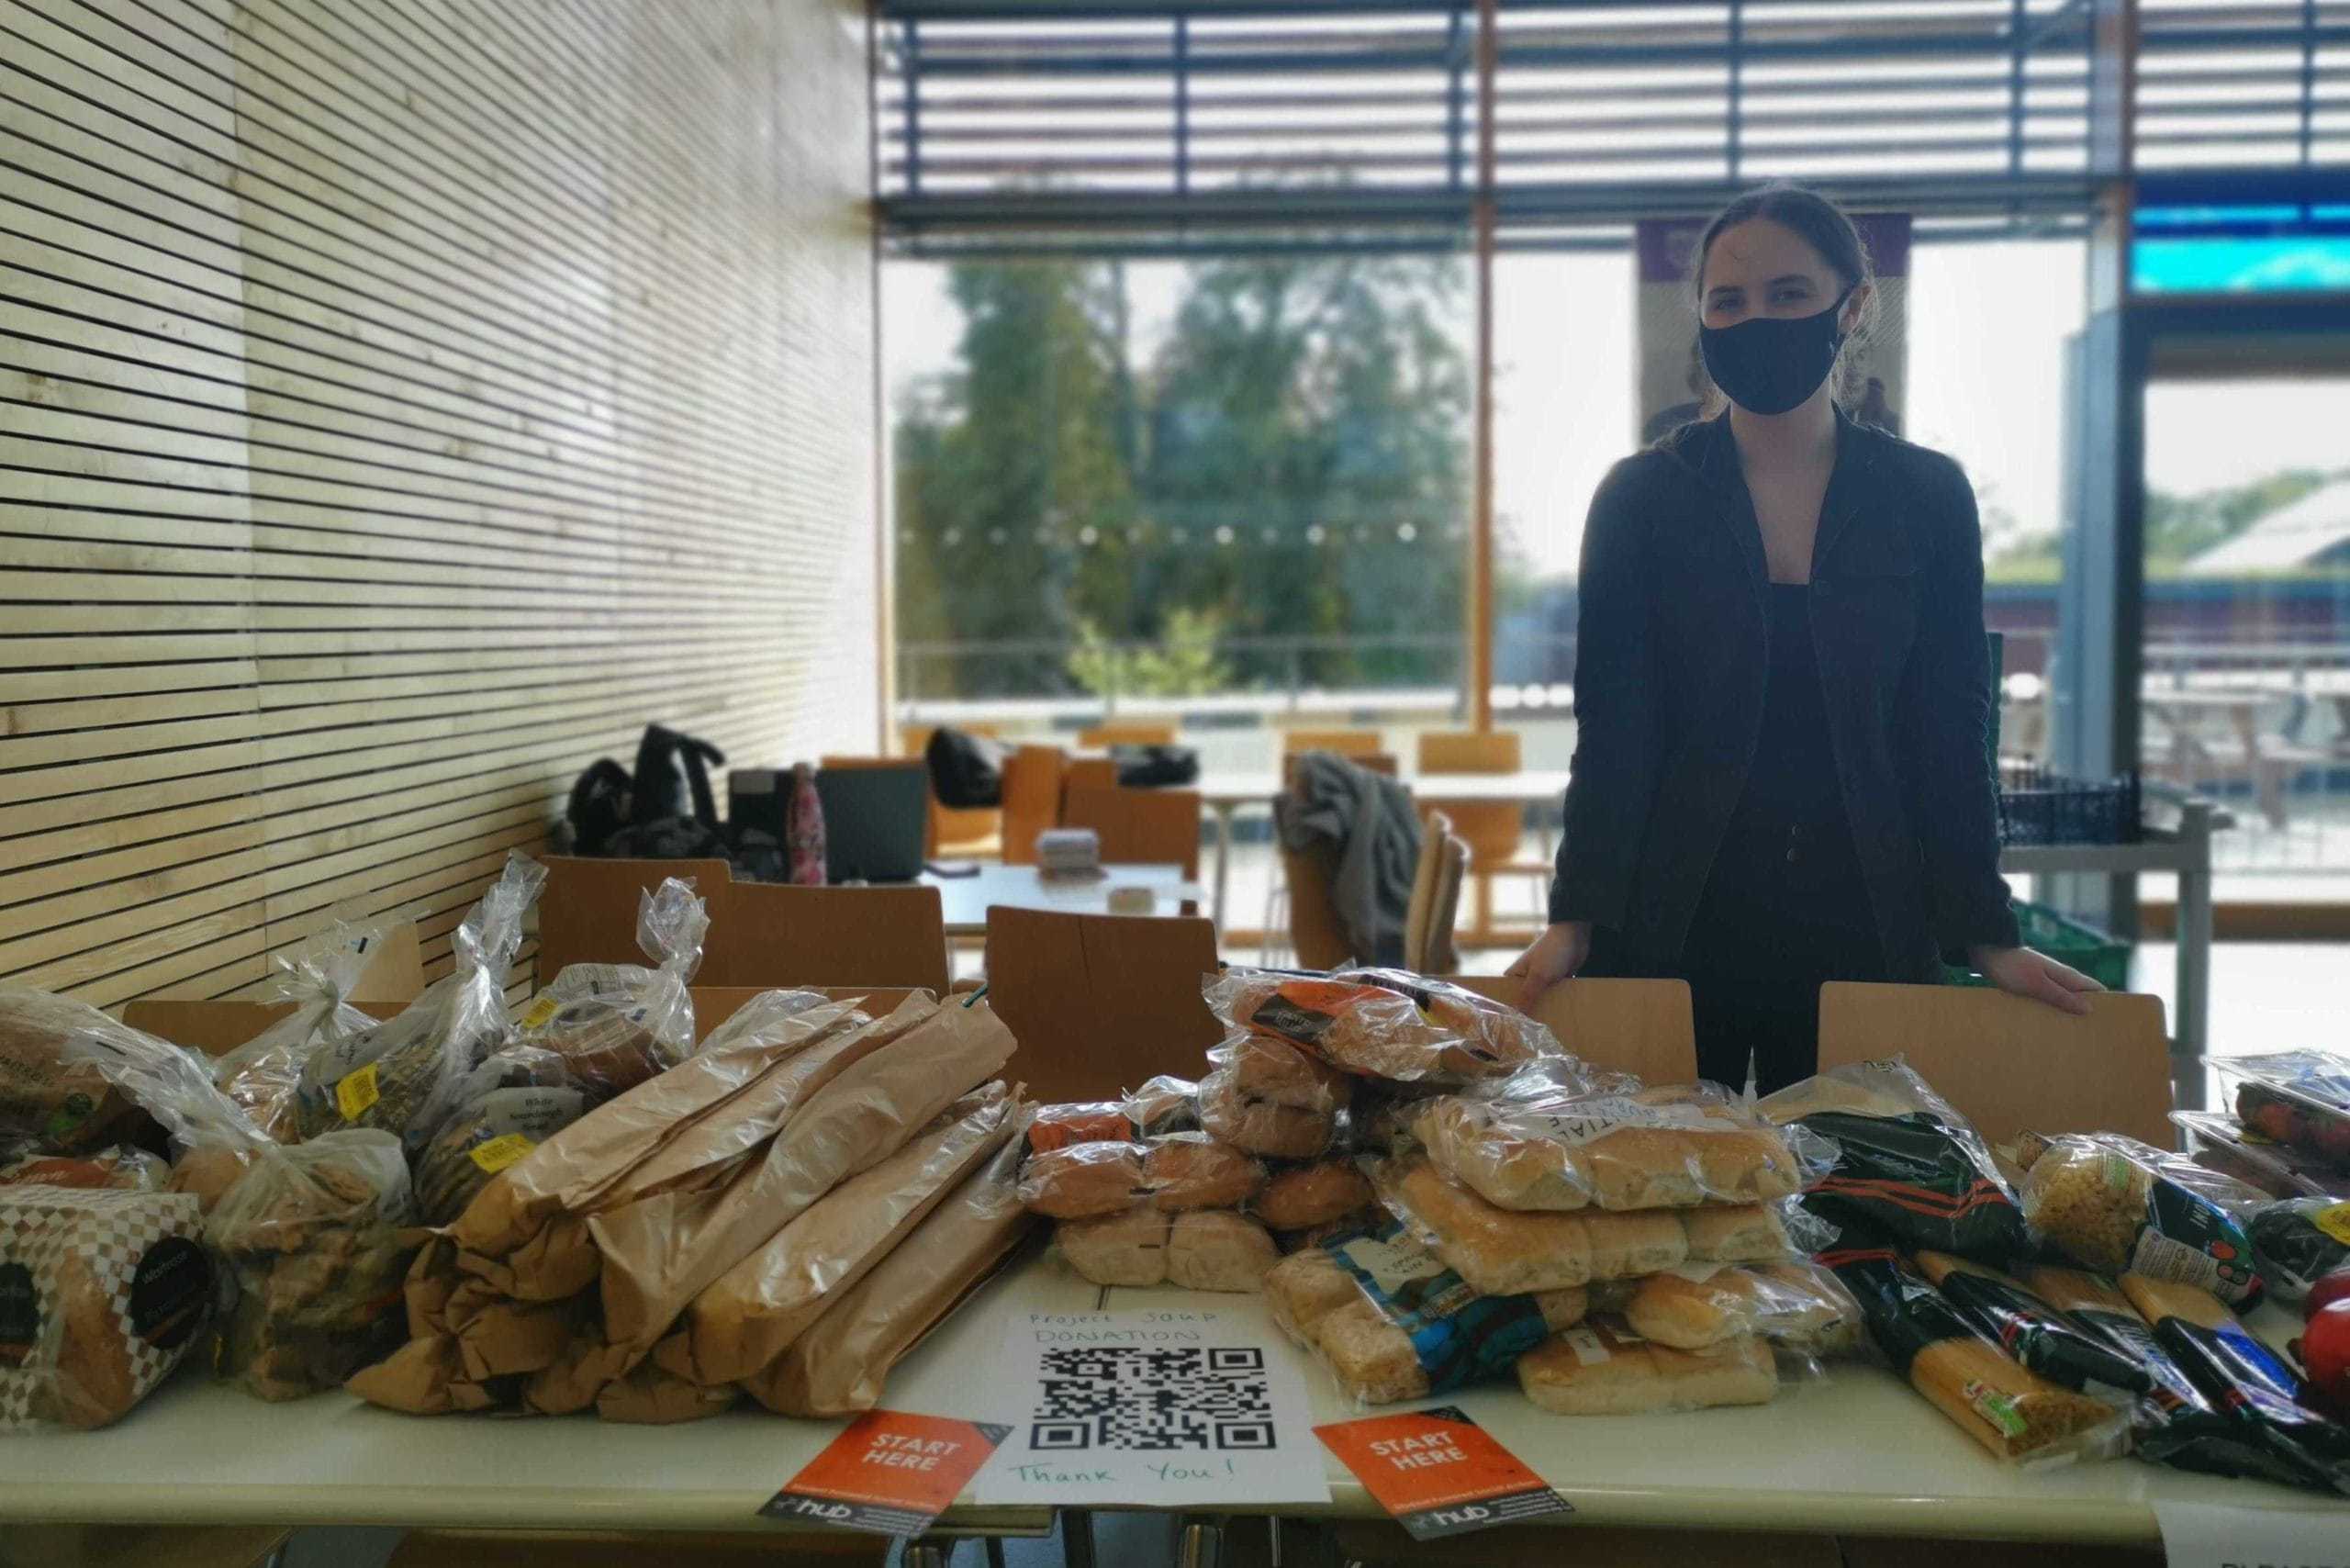 An individual wearing black stands behind a table. The table is covered with bread!